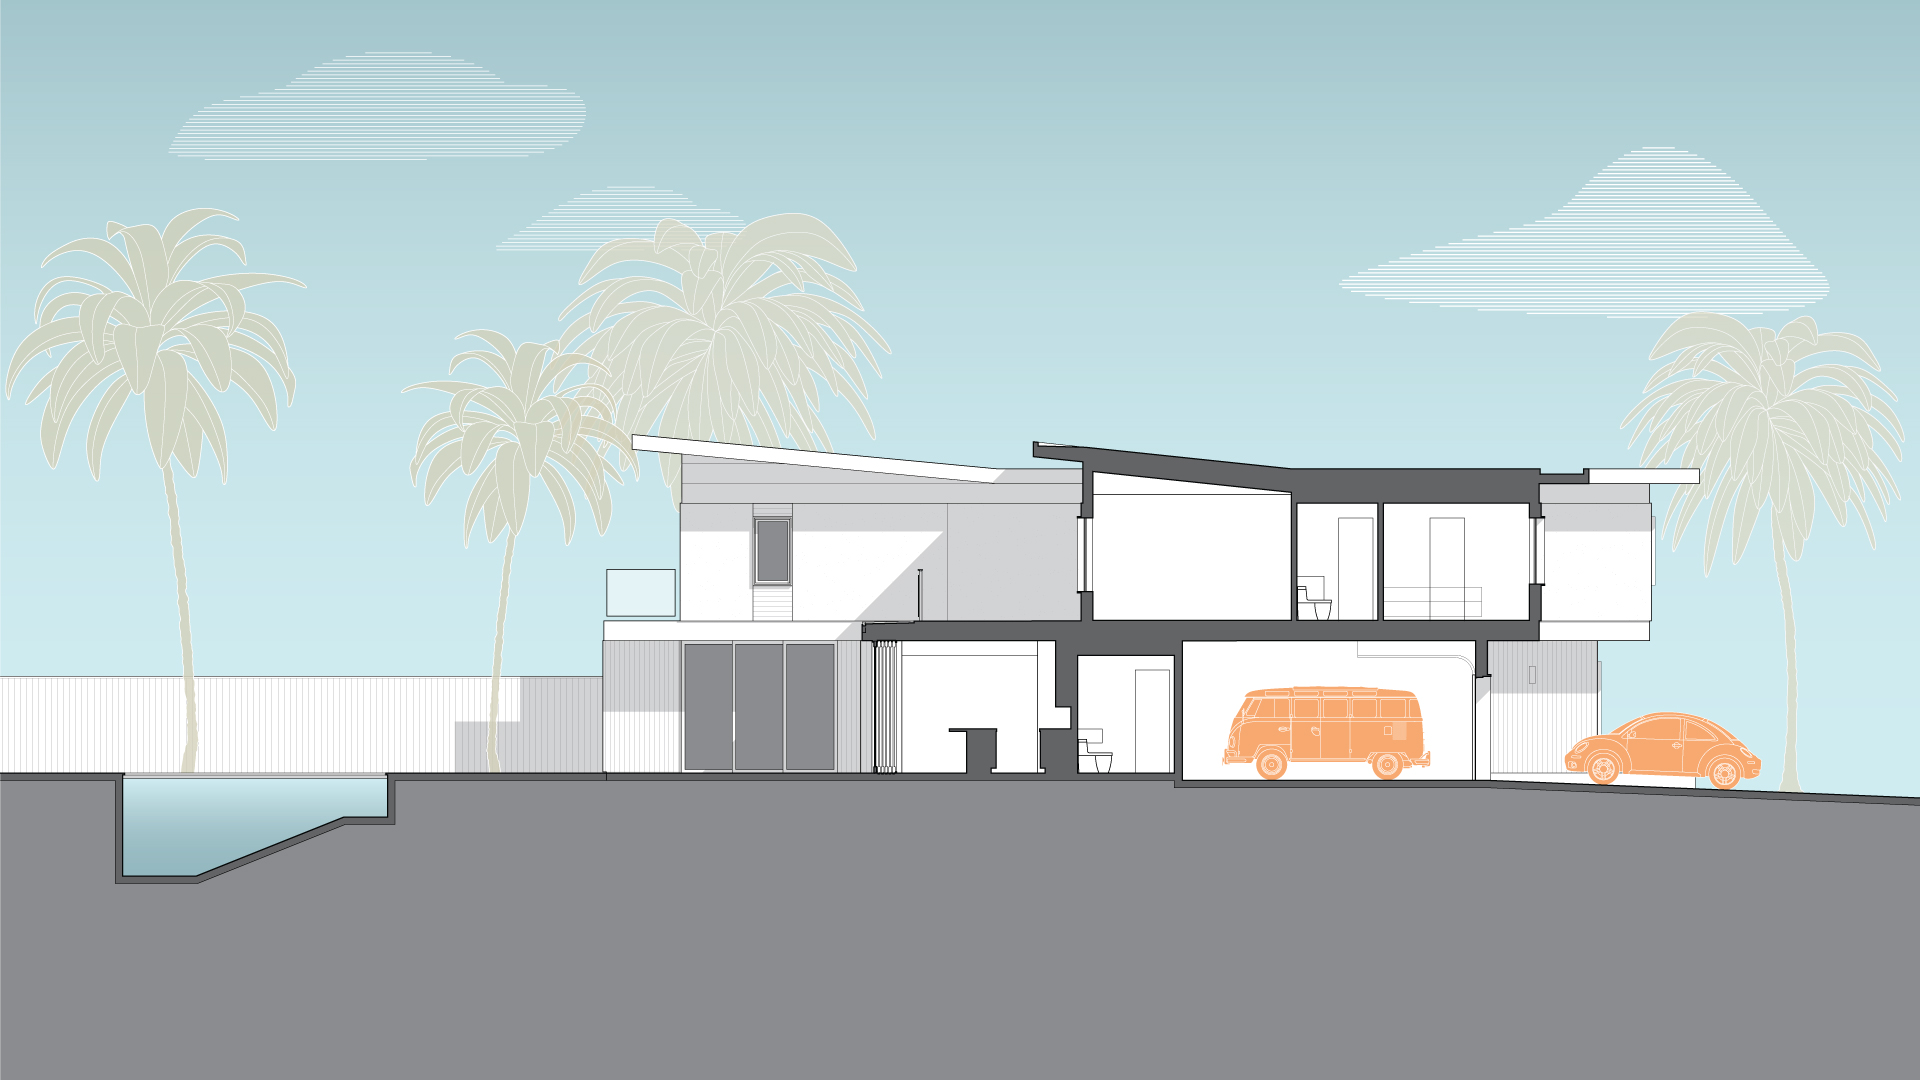 This is a section drawing through the garage, kitchen, accessory dwelling unit and pool at the Point Loma House.